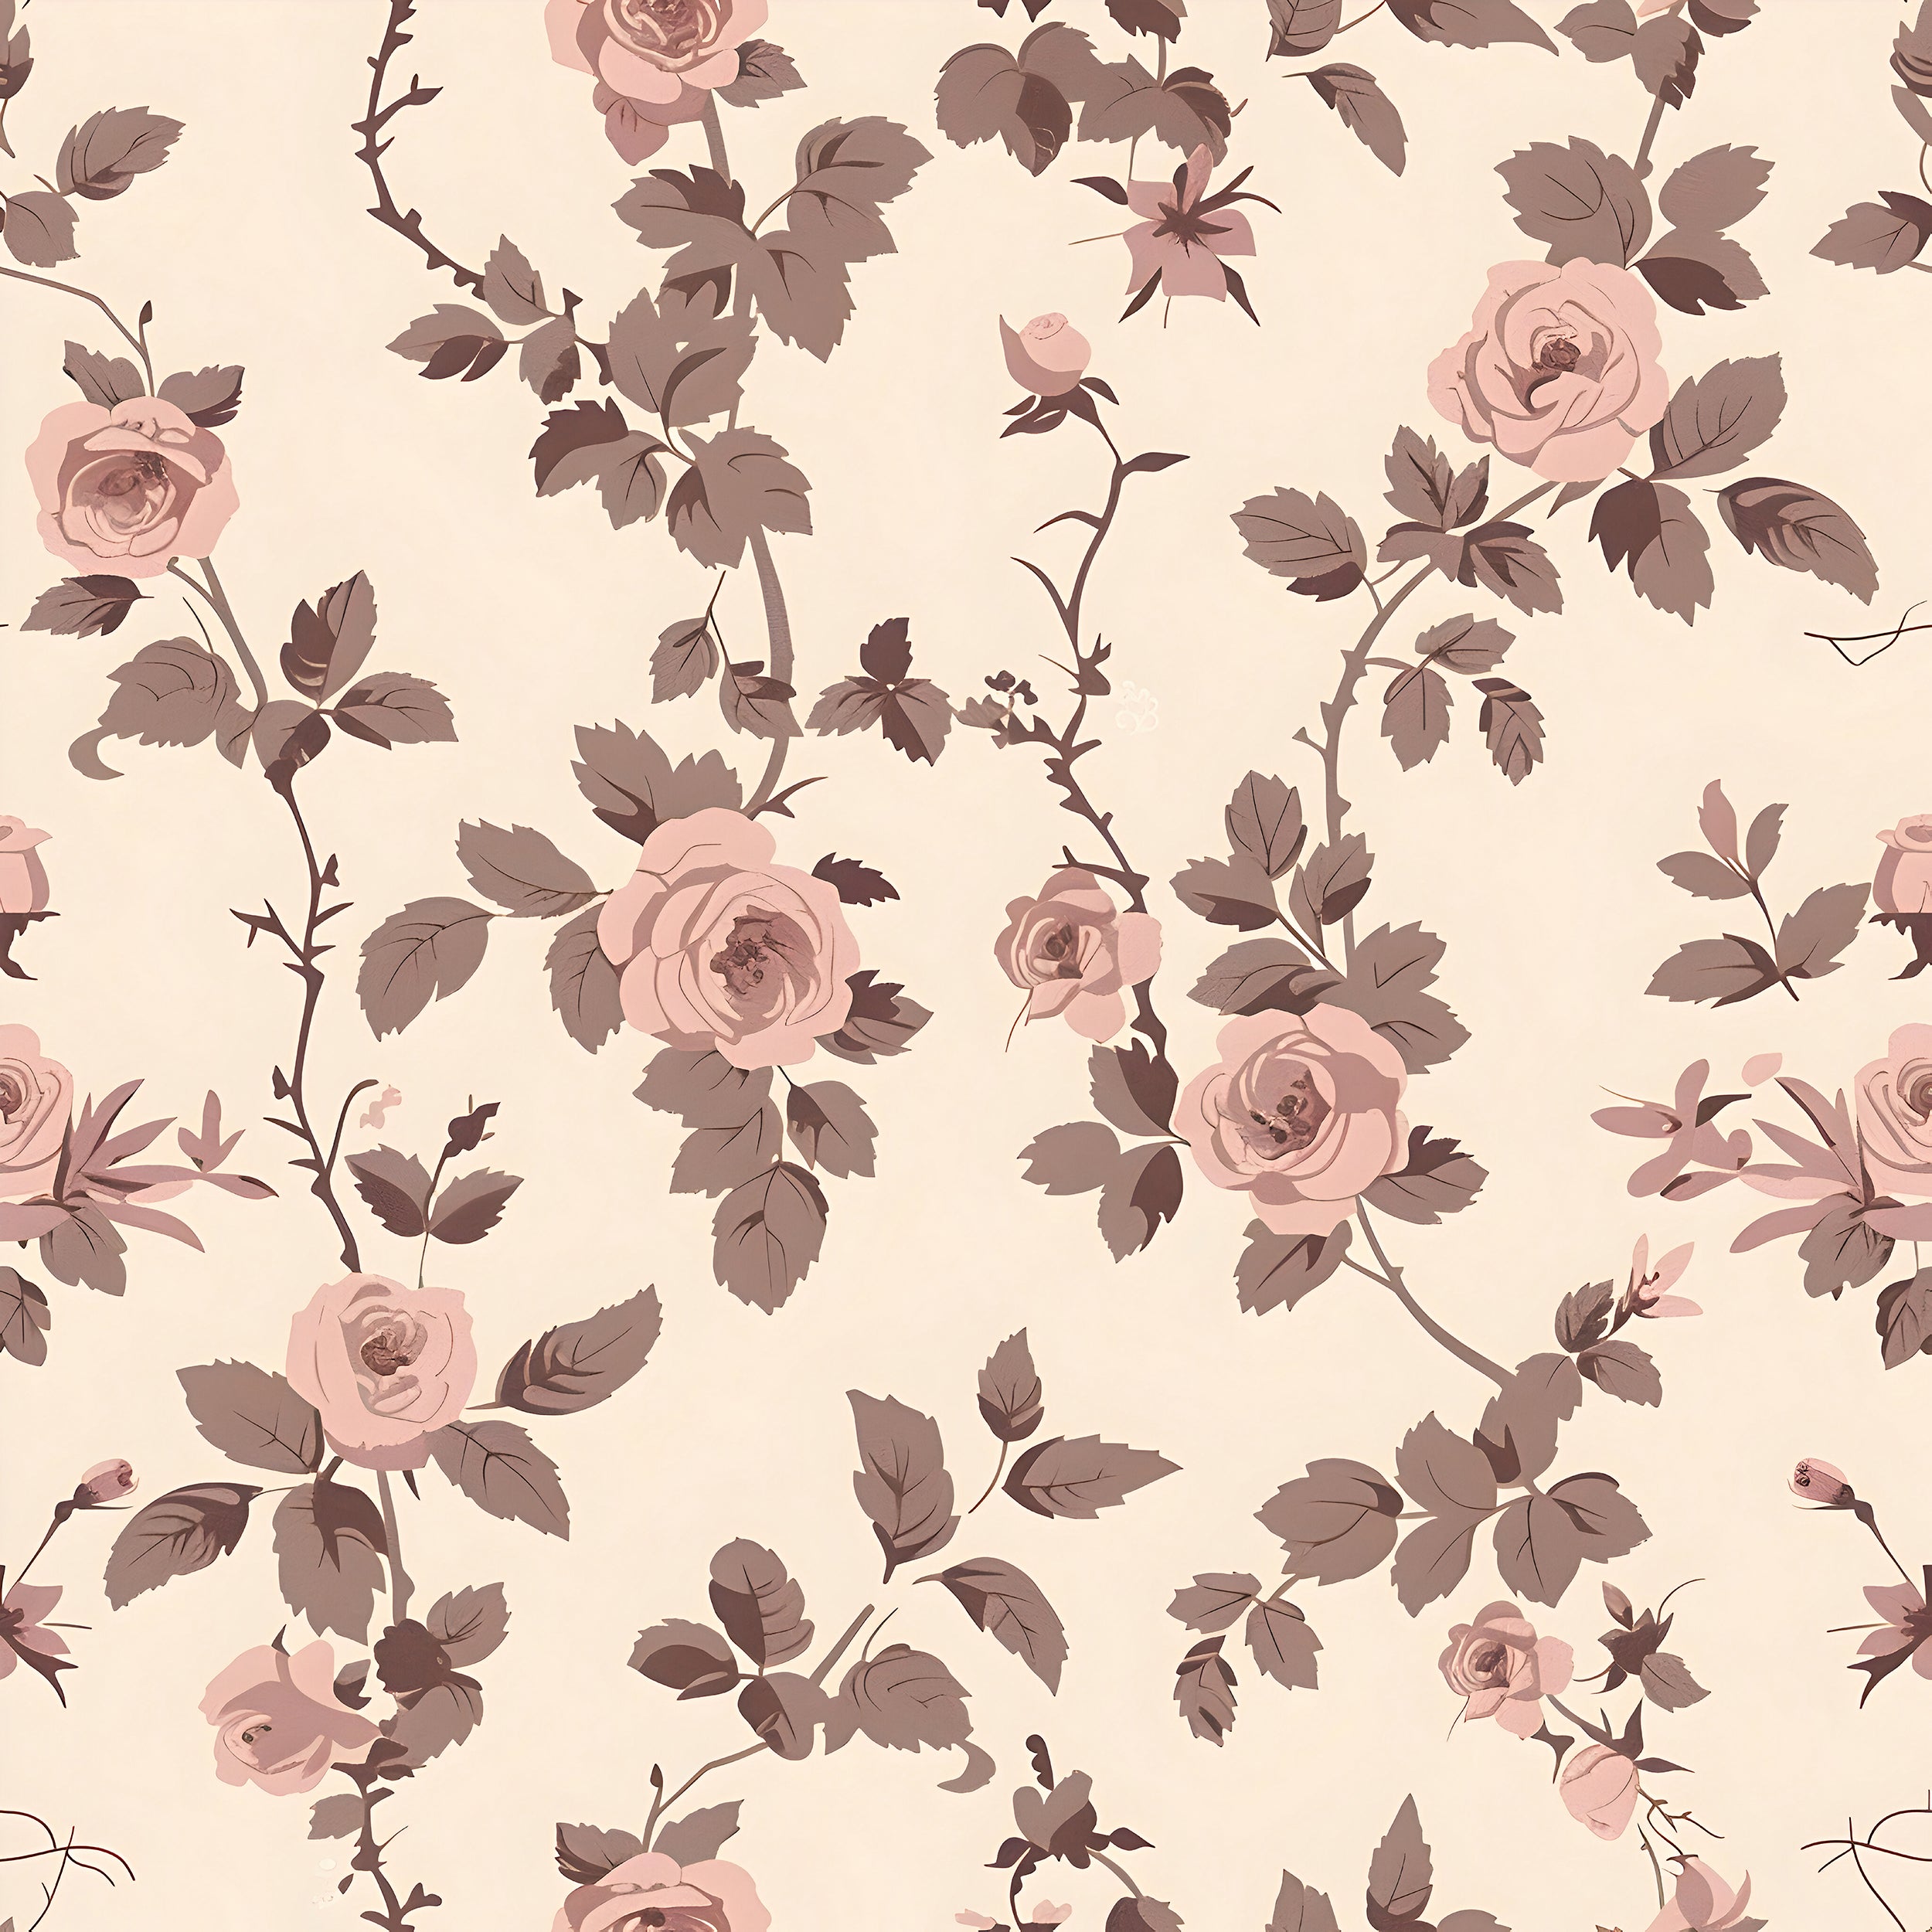 Elegant rose branch wall mural for a natural touch Botanical wallpaper with soft watercolor tones